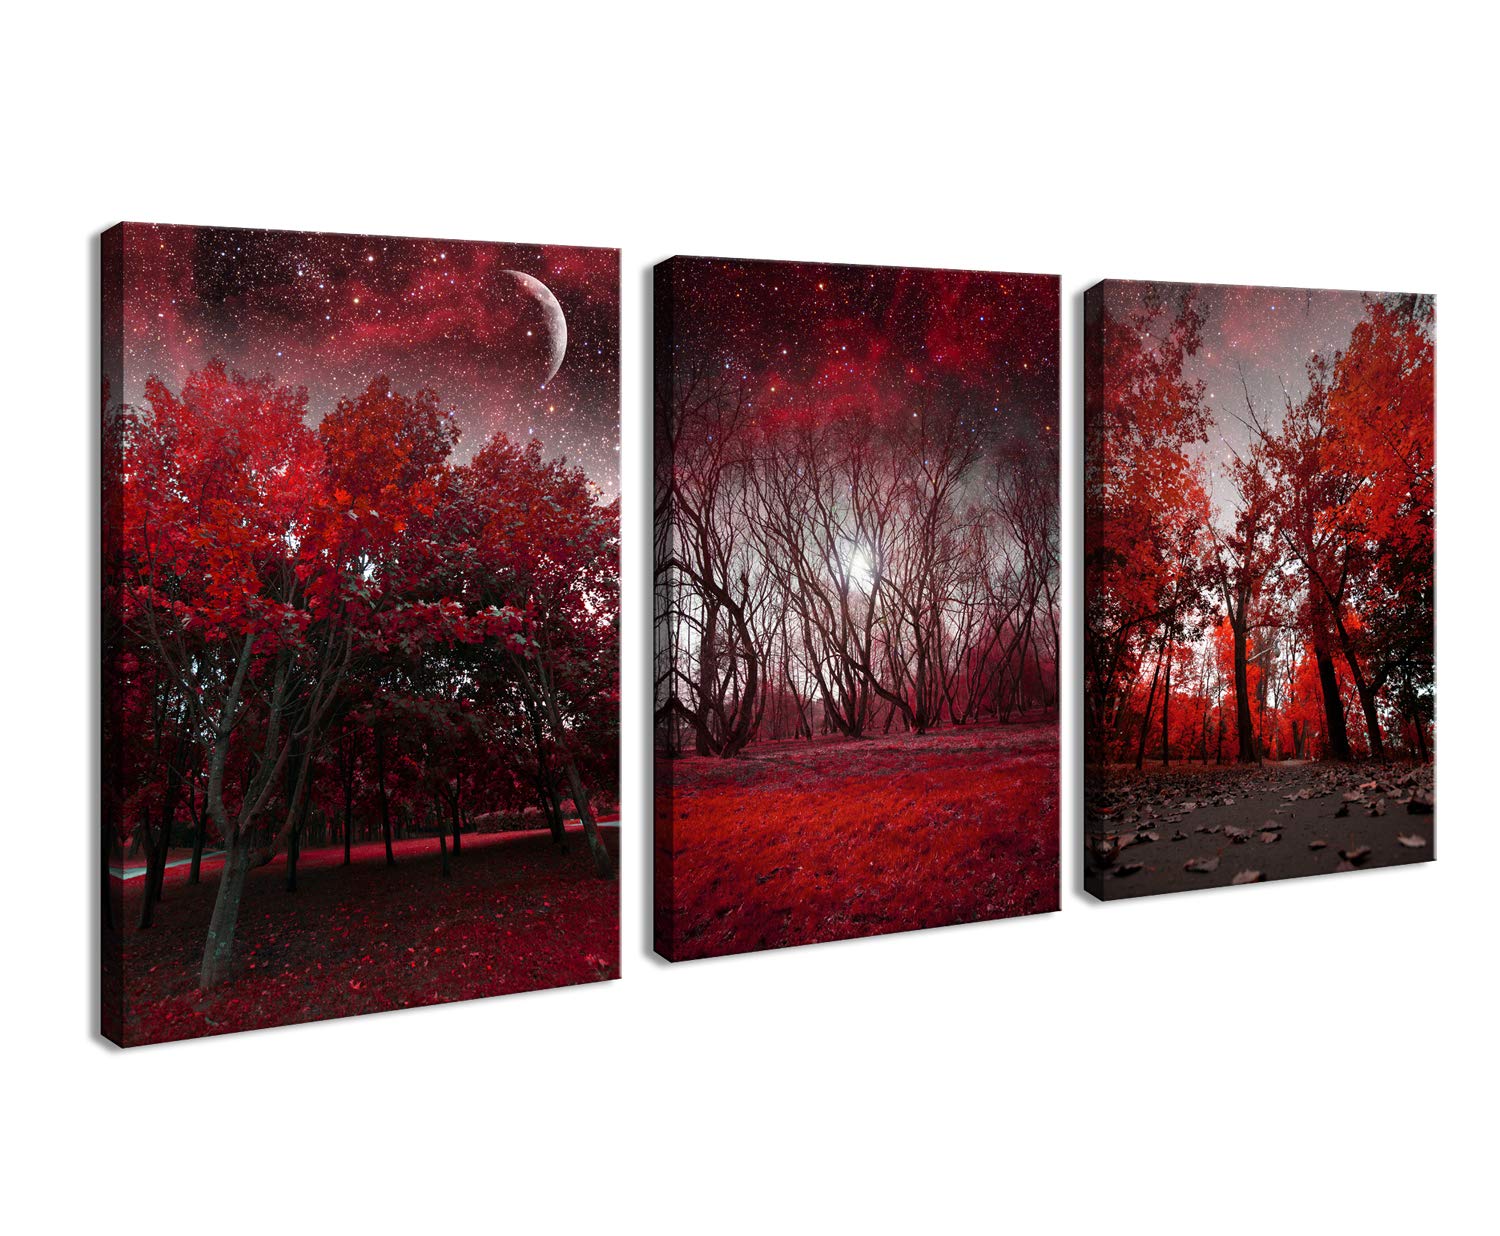 Book Cover Cao Gen Decor Art-AH40346 Canvas Prints 3 panels Framed Wall Art Red Trees Paintings Printed Pictures Stretched for Home Decoration 16x24inch x3pcs